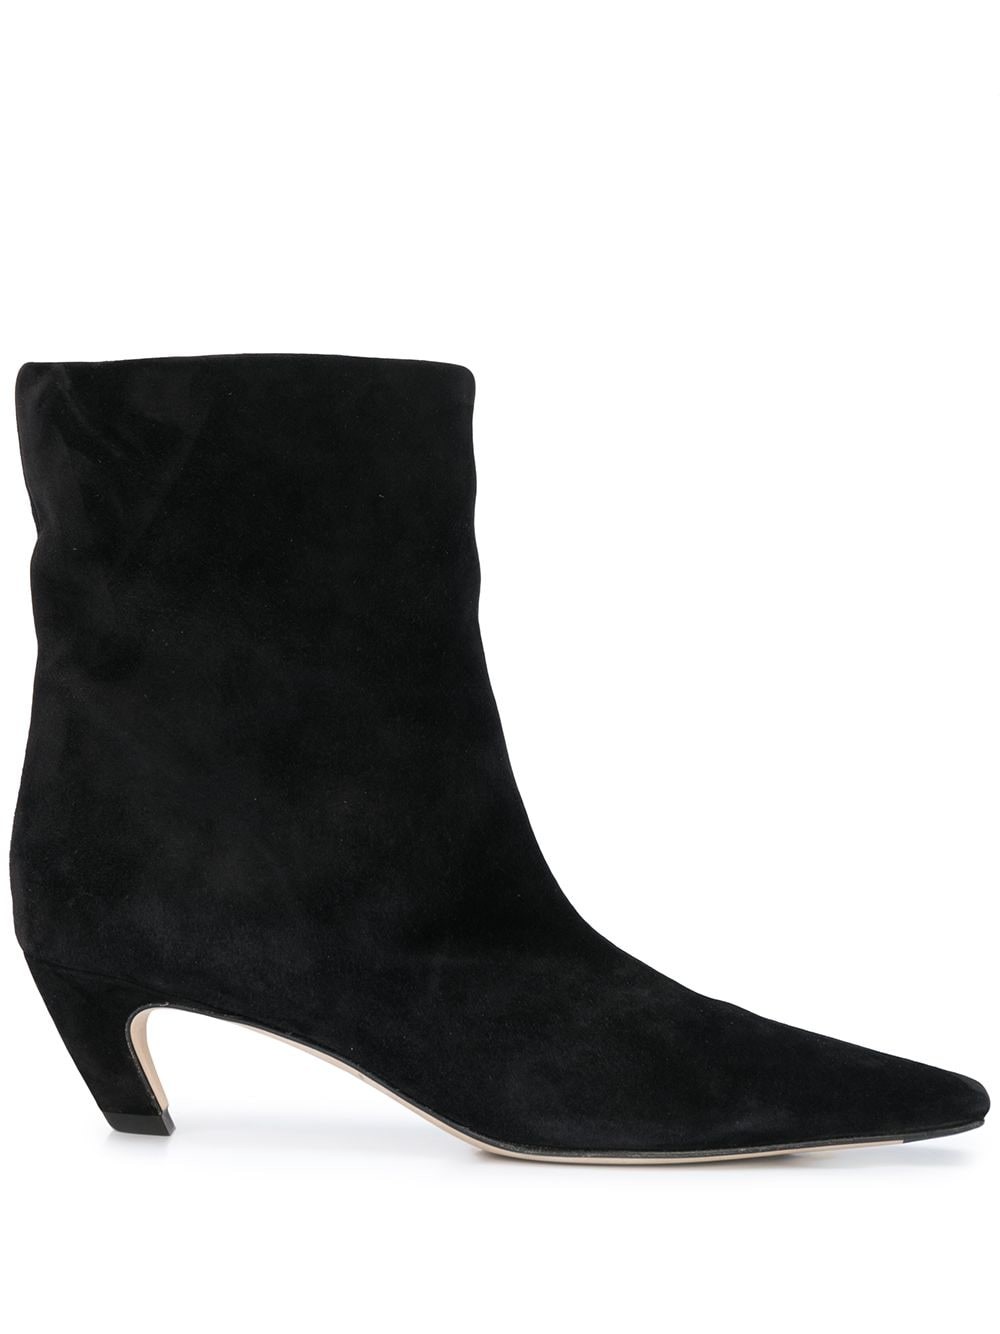 Khaite Pointed Toe Ankle Boots